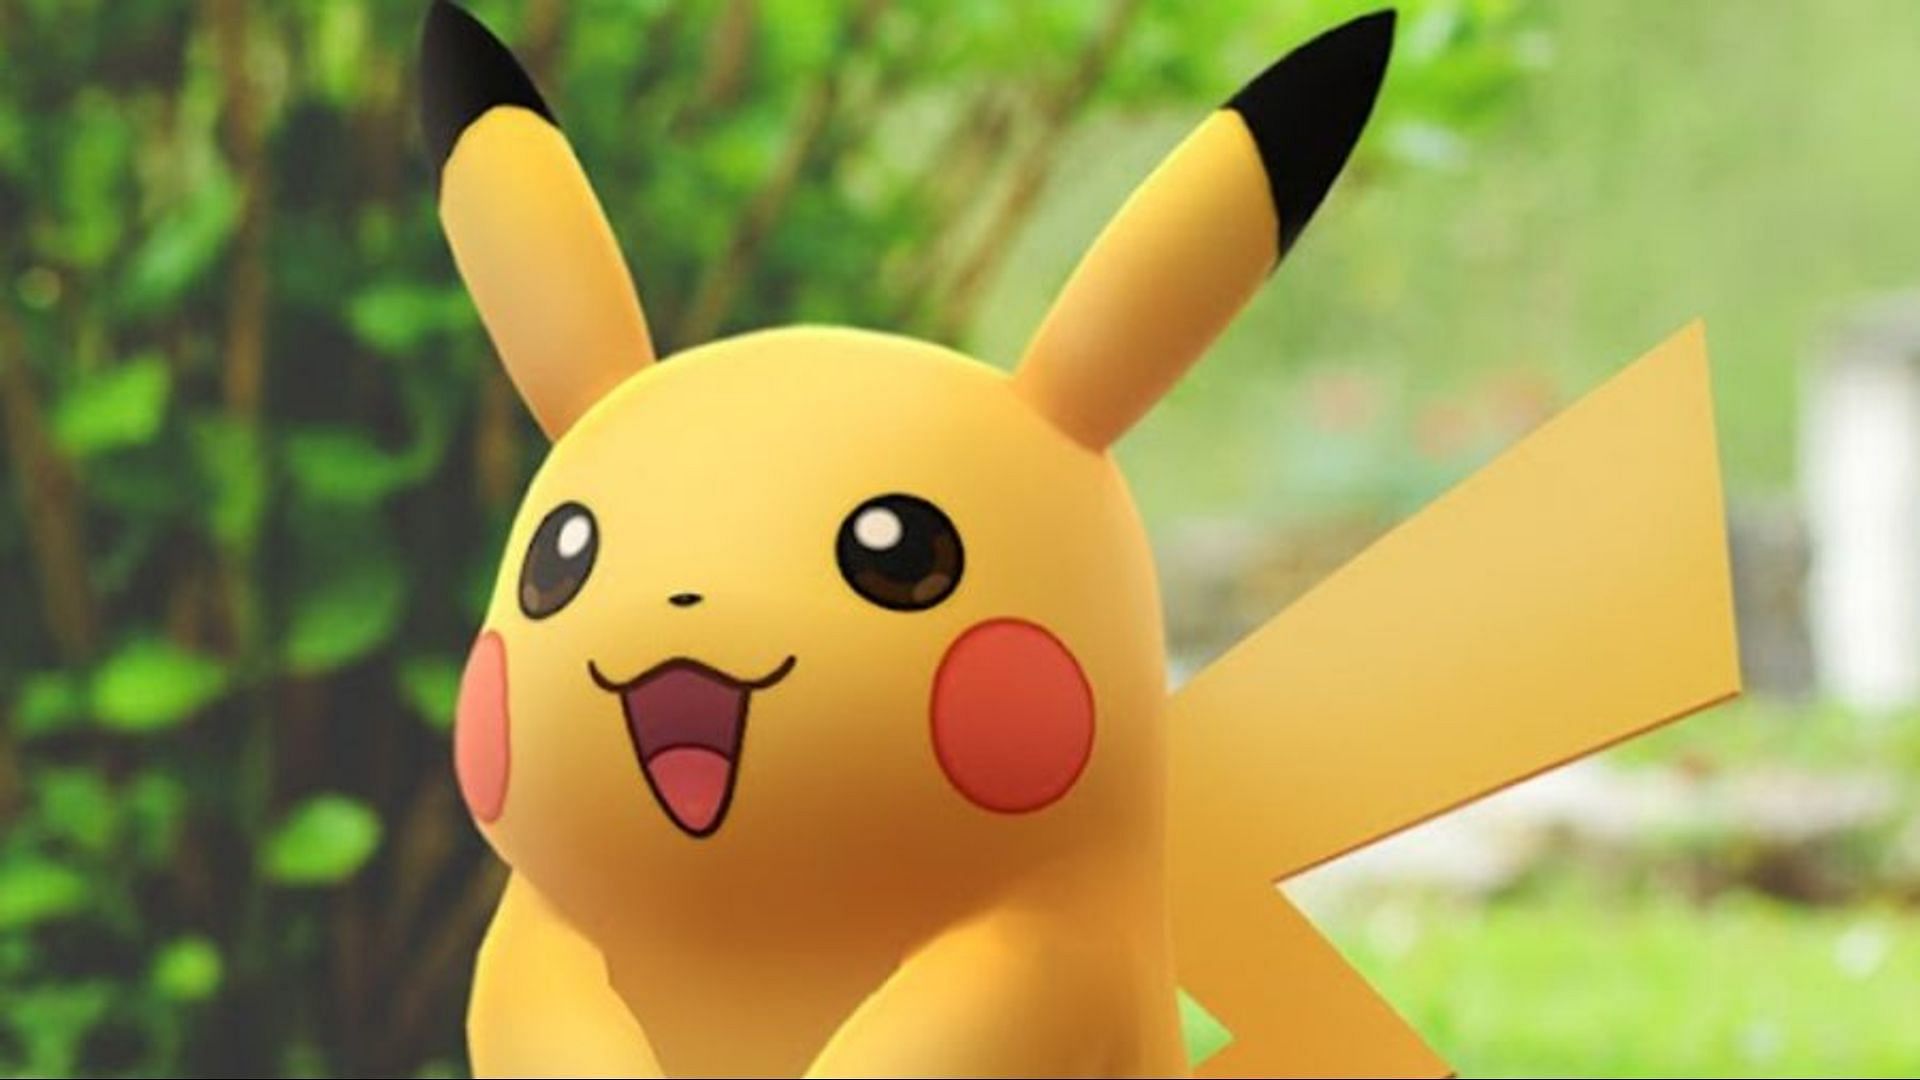 Pikachu as it appears in promotional artwork for Pokemon GO (Image via Niantic)